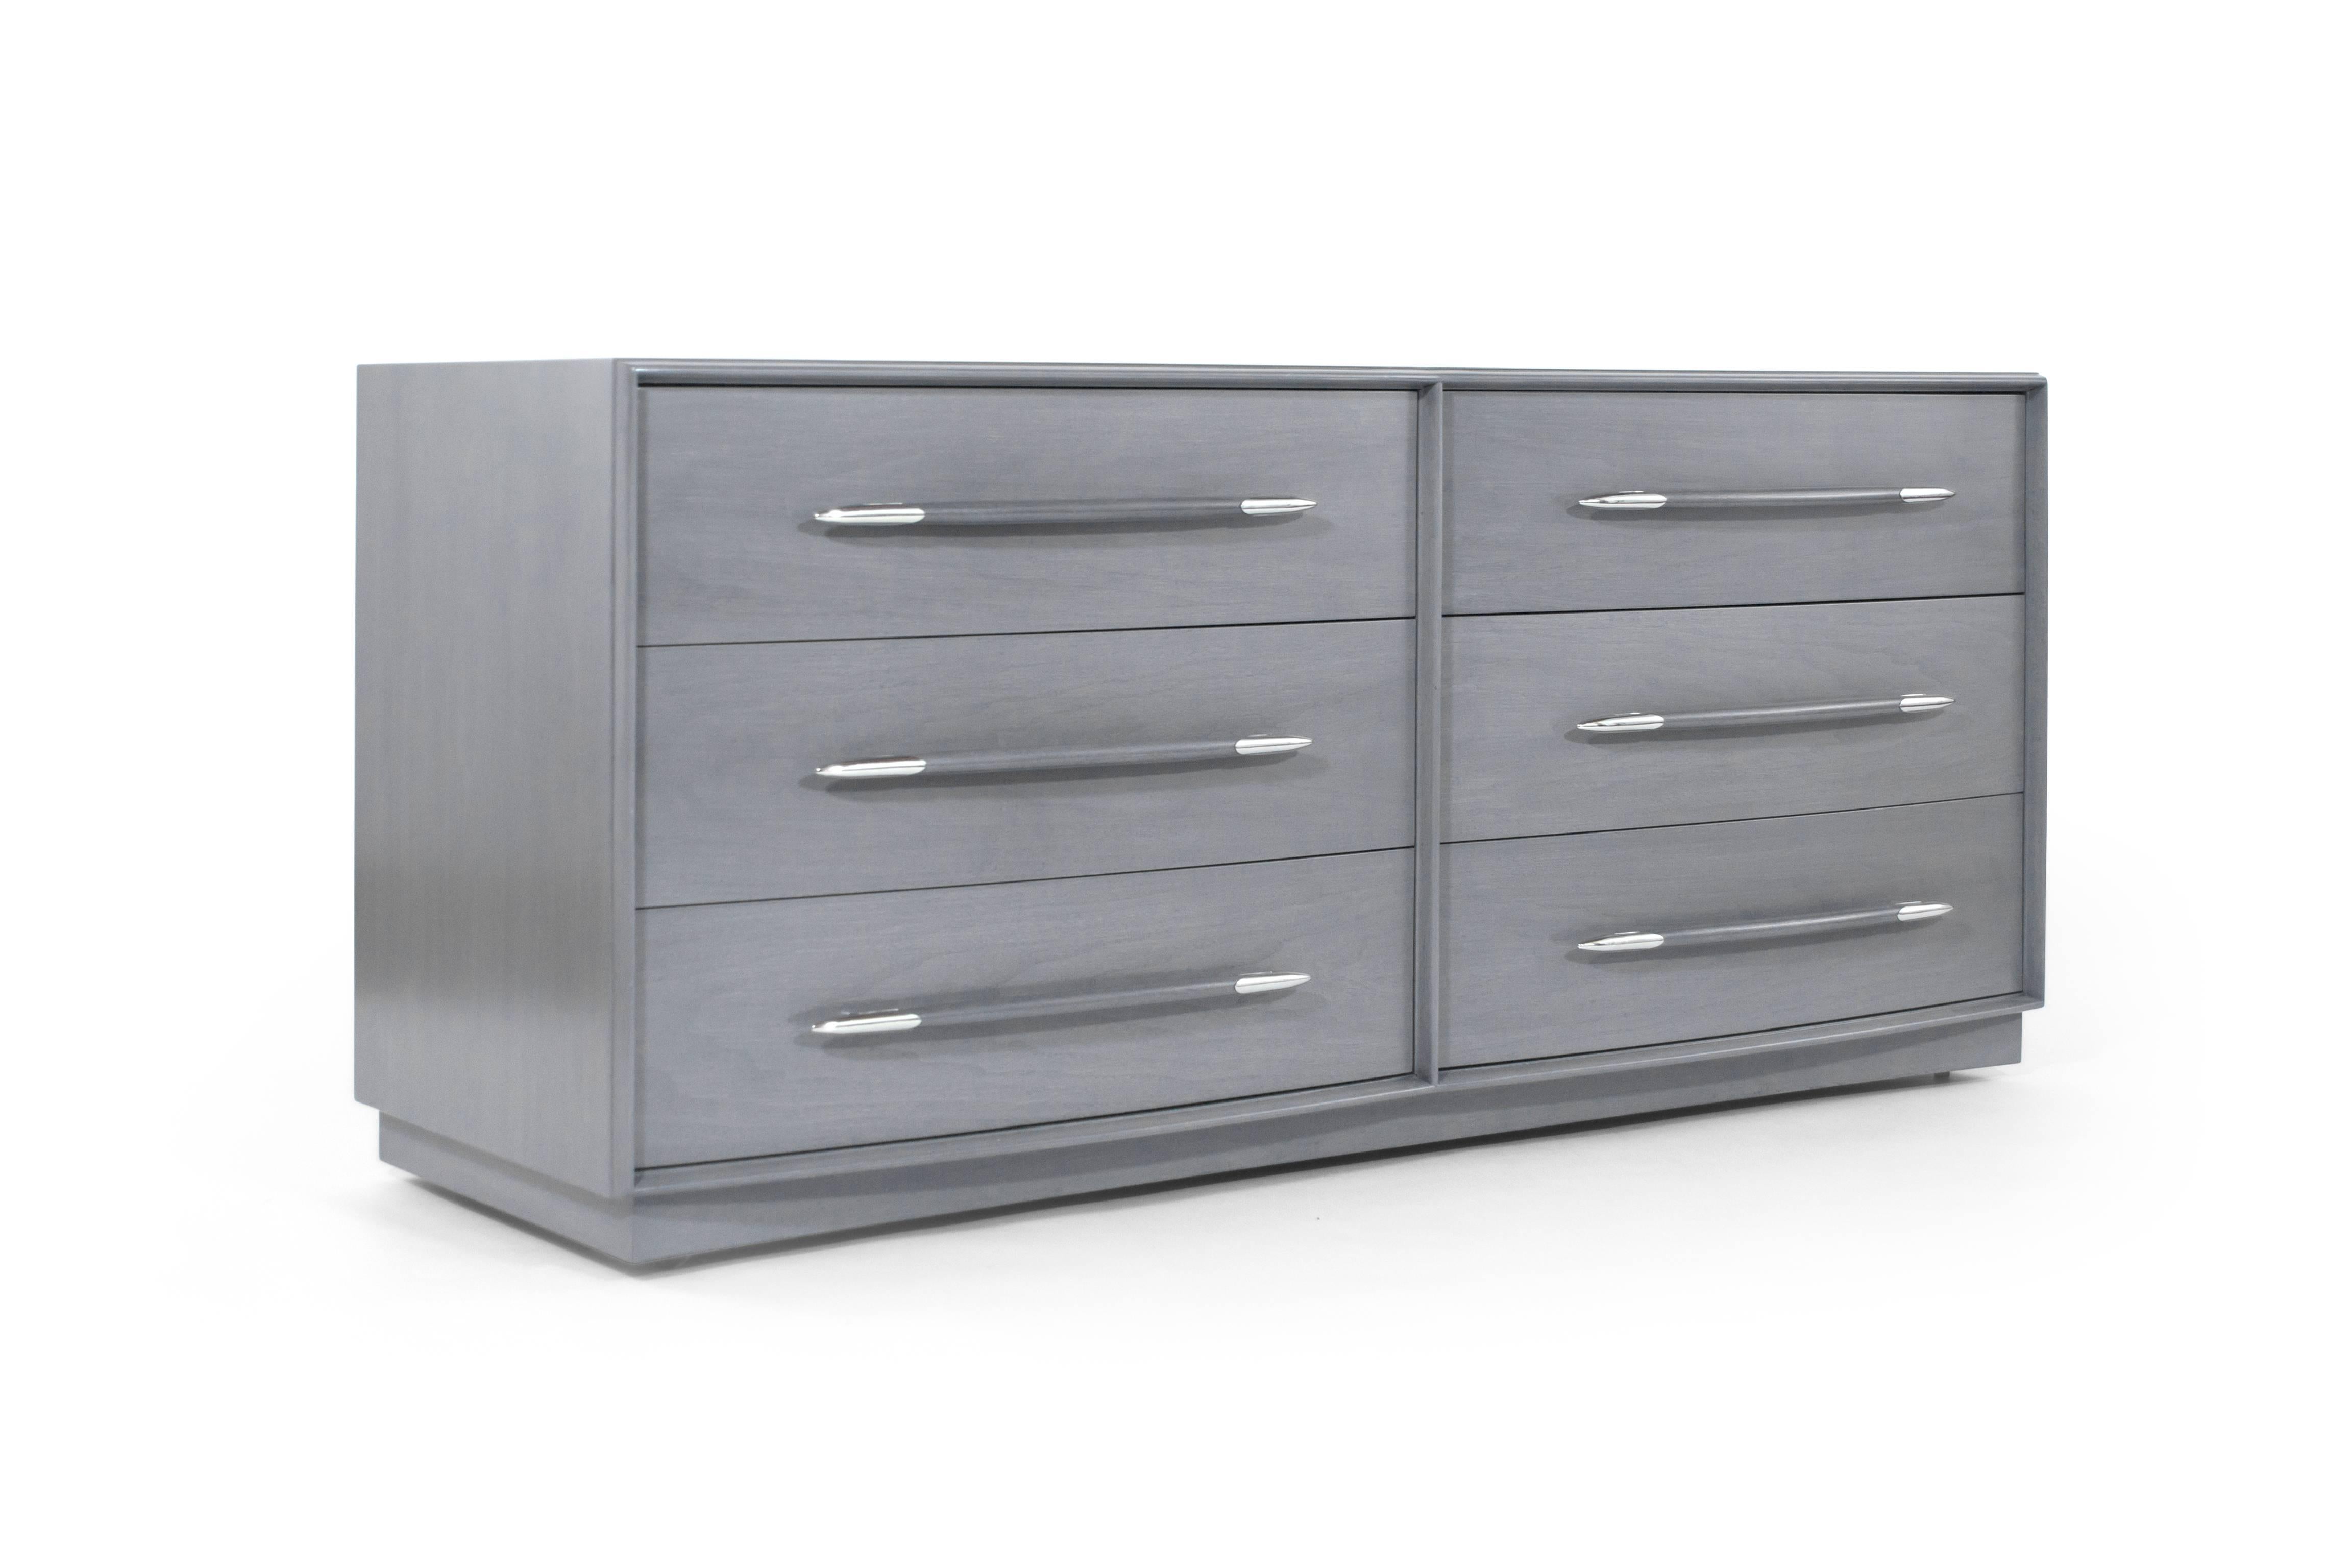 A T.H. Robsjohn-Gibbings for Widdicomb dresser fatalistically redone in grey. Six deep drawers provide ample storage space.